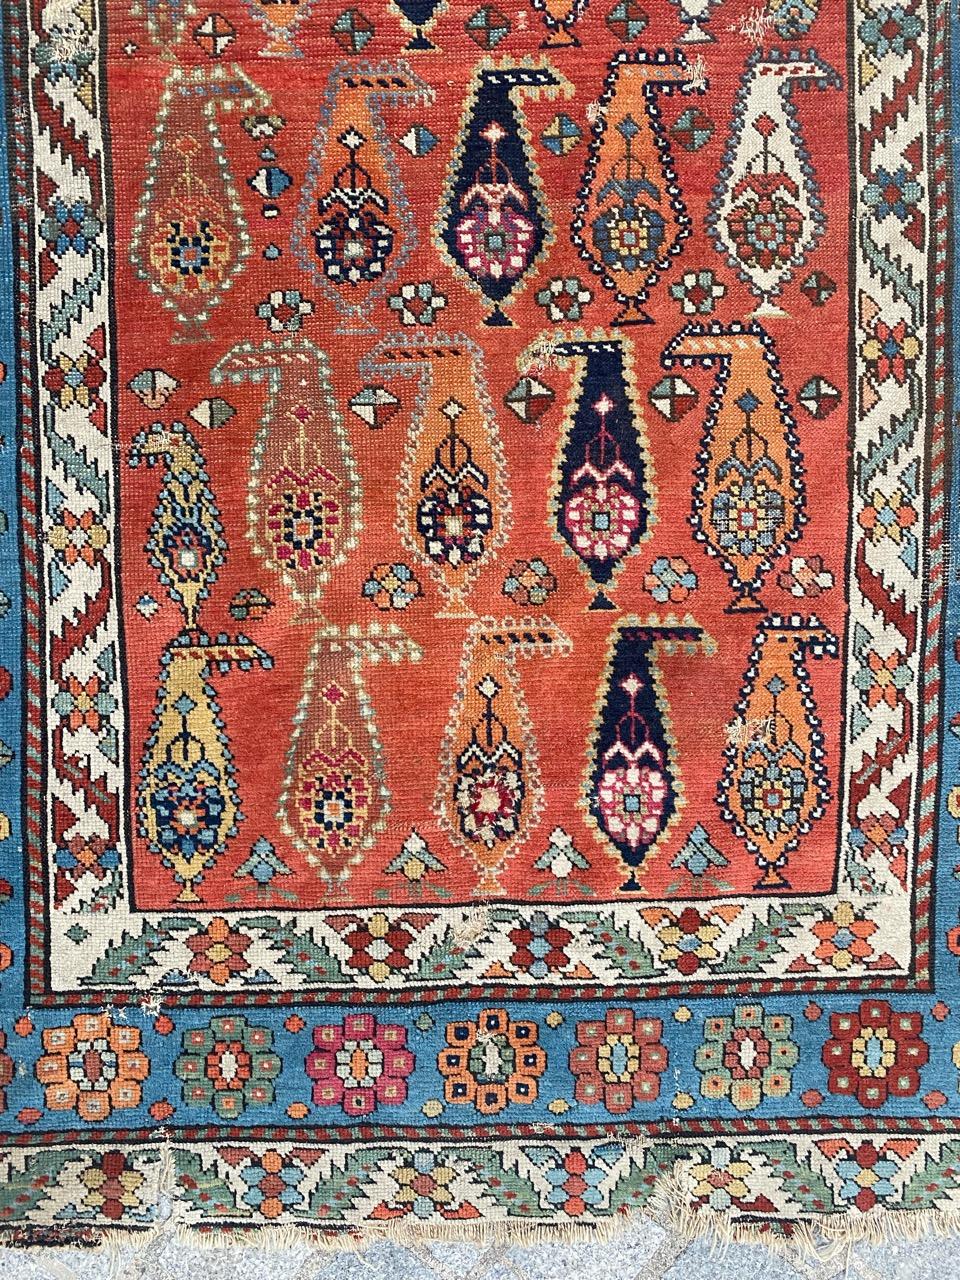 Nice 19th century shirwan rug with beautiful botteh design and pretty natural colors, entirely hand knotted with wool velvet on wool foundation.

✨✨✨
